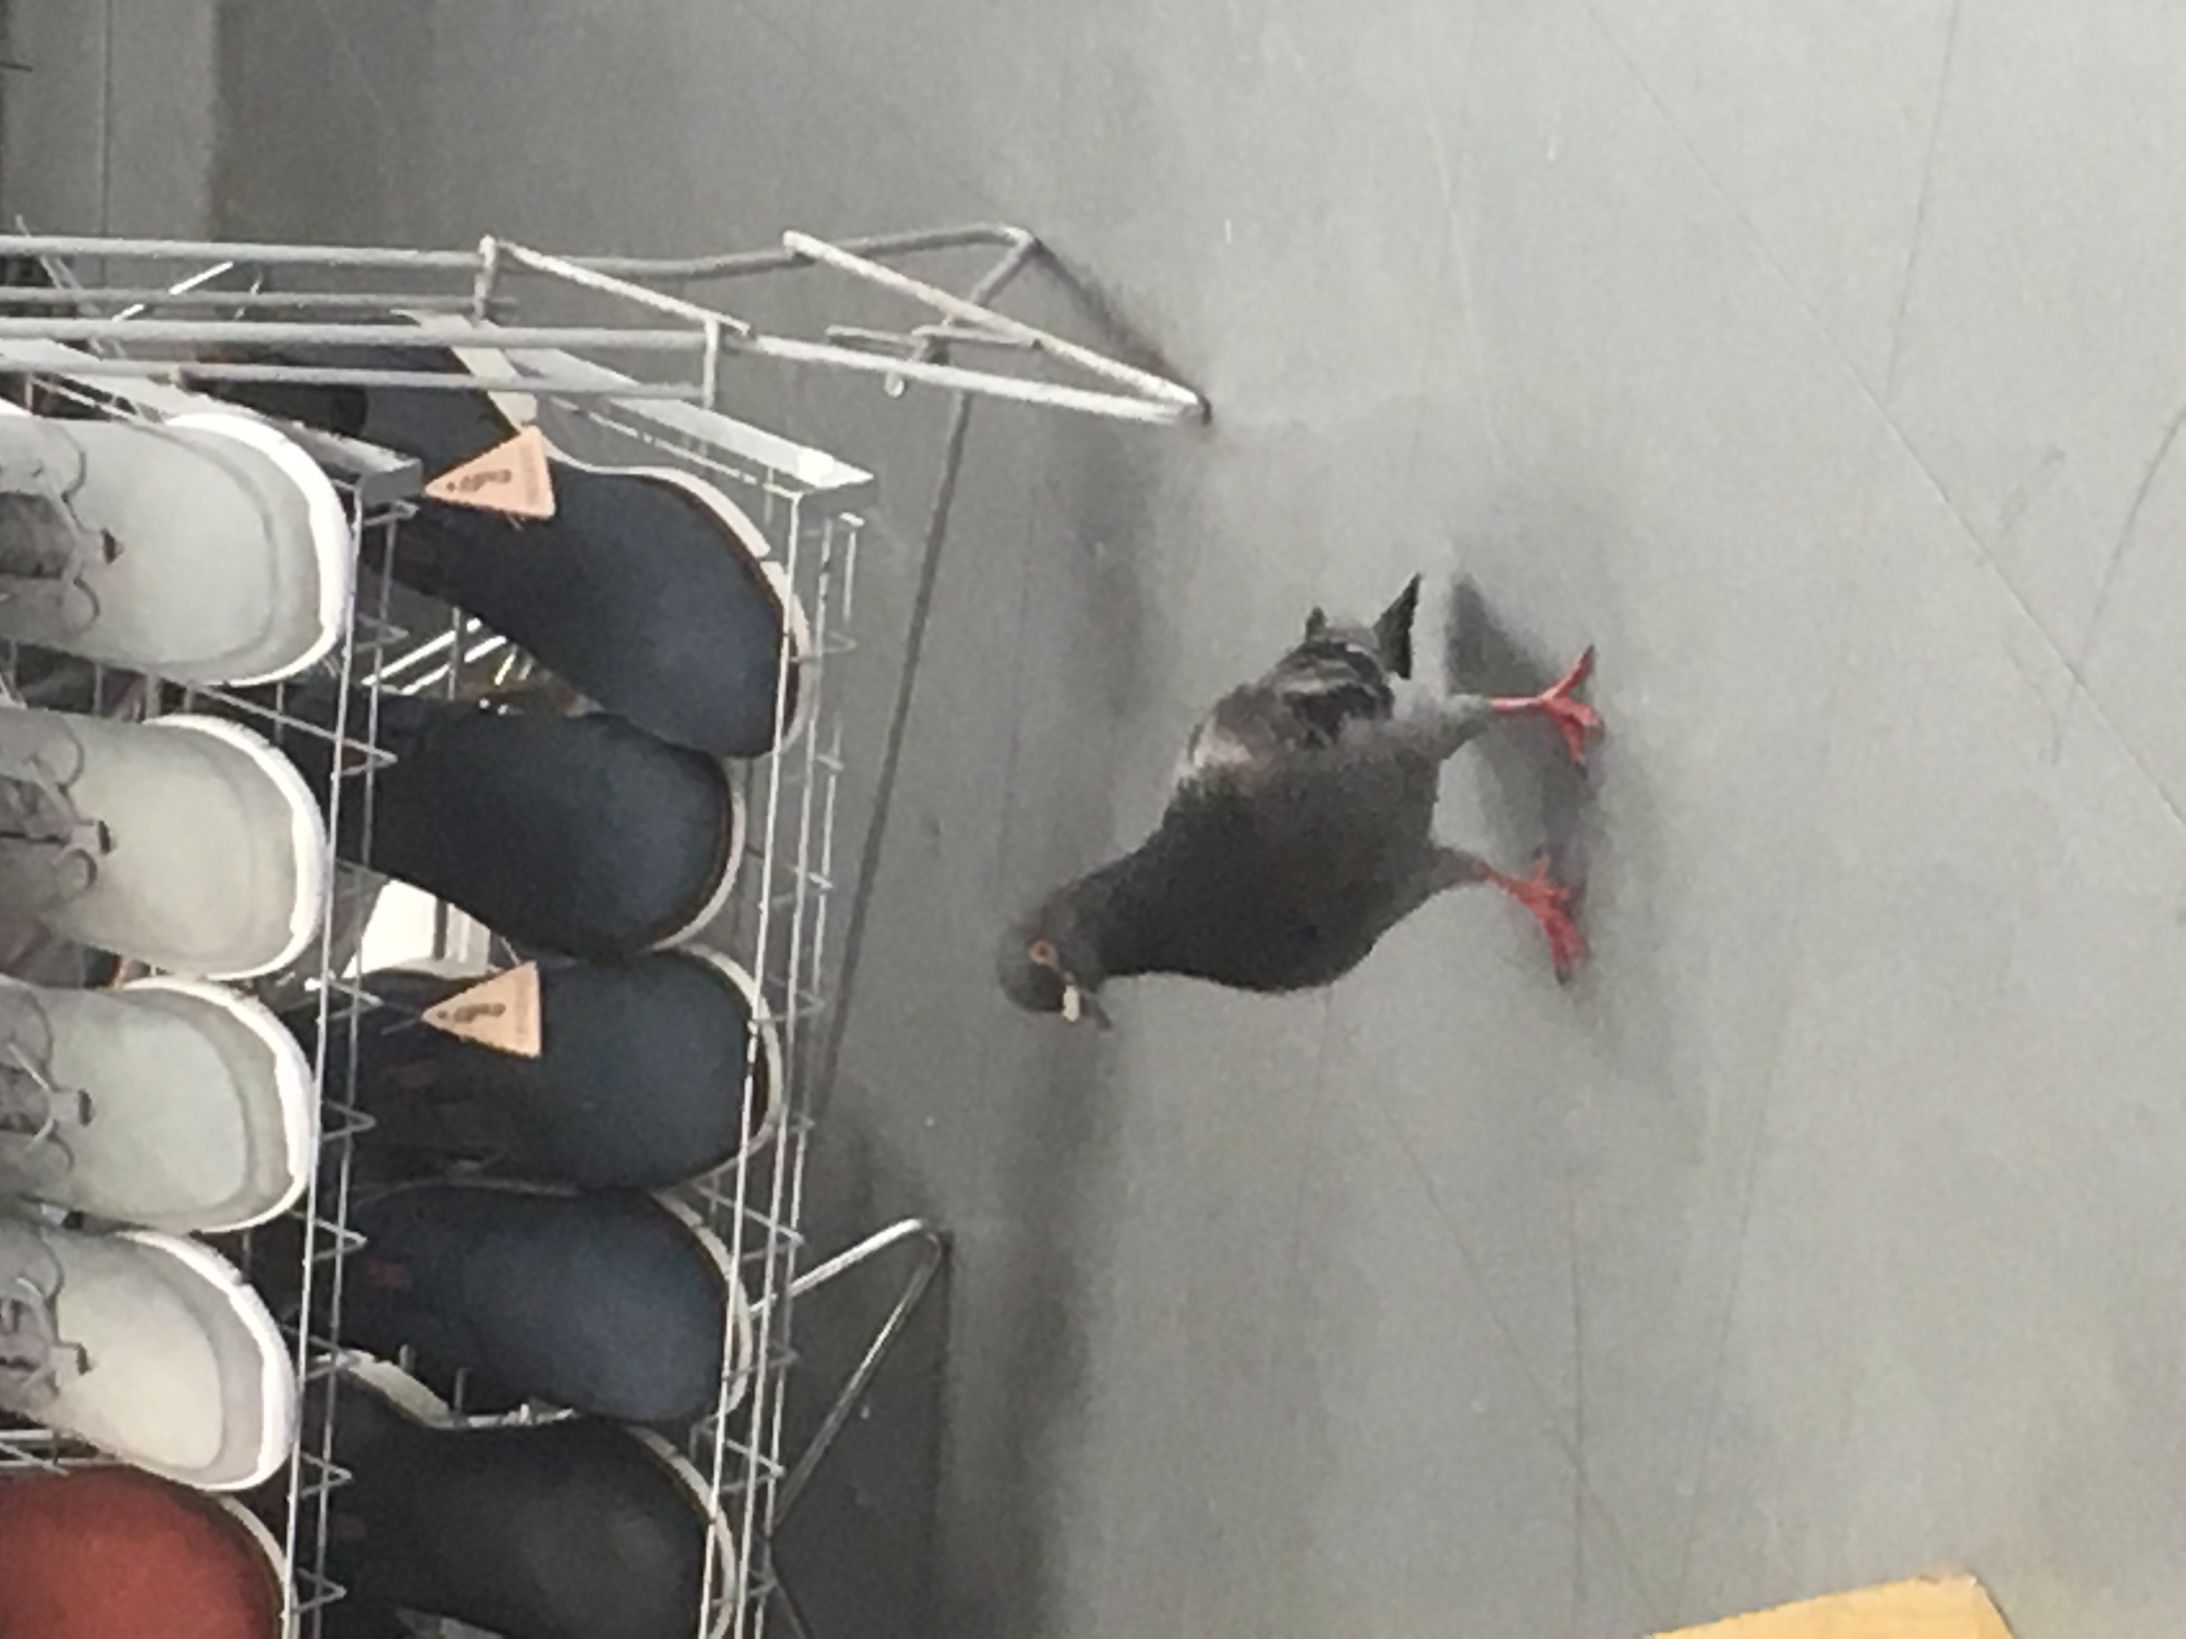 High Quality Pigeon in a shoe shop? Blank Meme Template